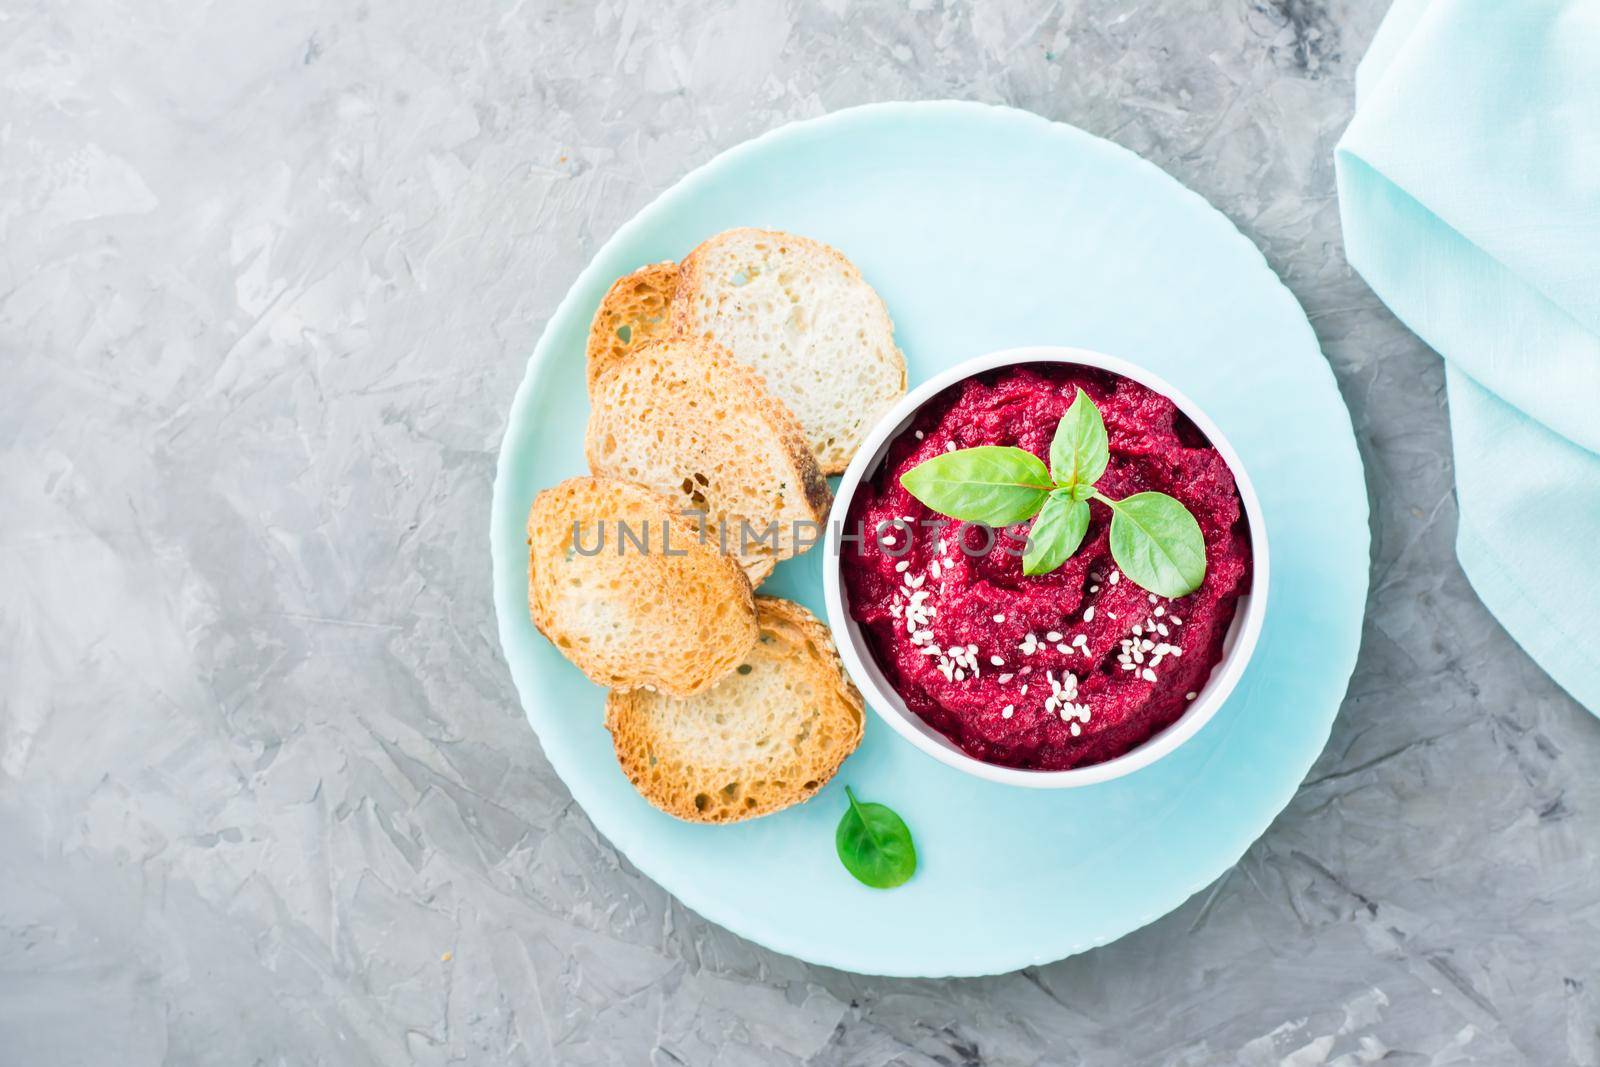 Homemade baked beetroot hummus in a bowl with sesame seeds and basil and baked small toast on a plate on the table. Top view